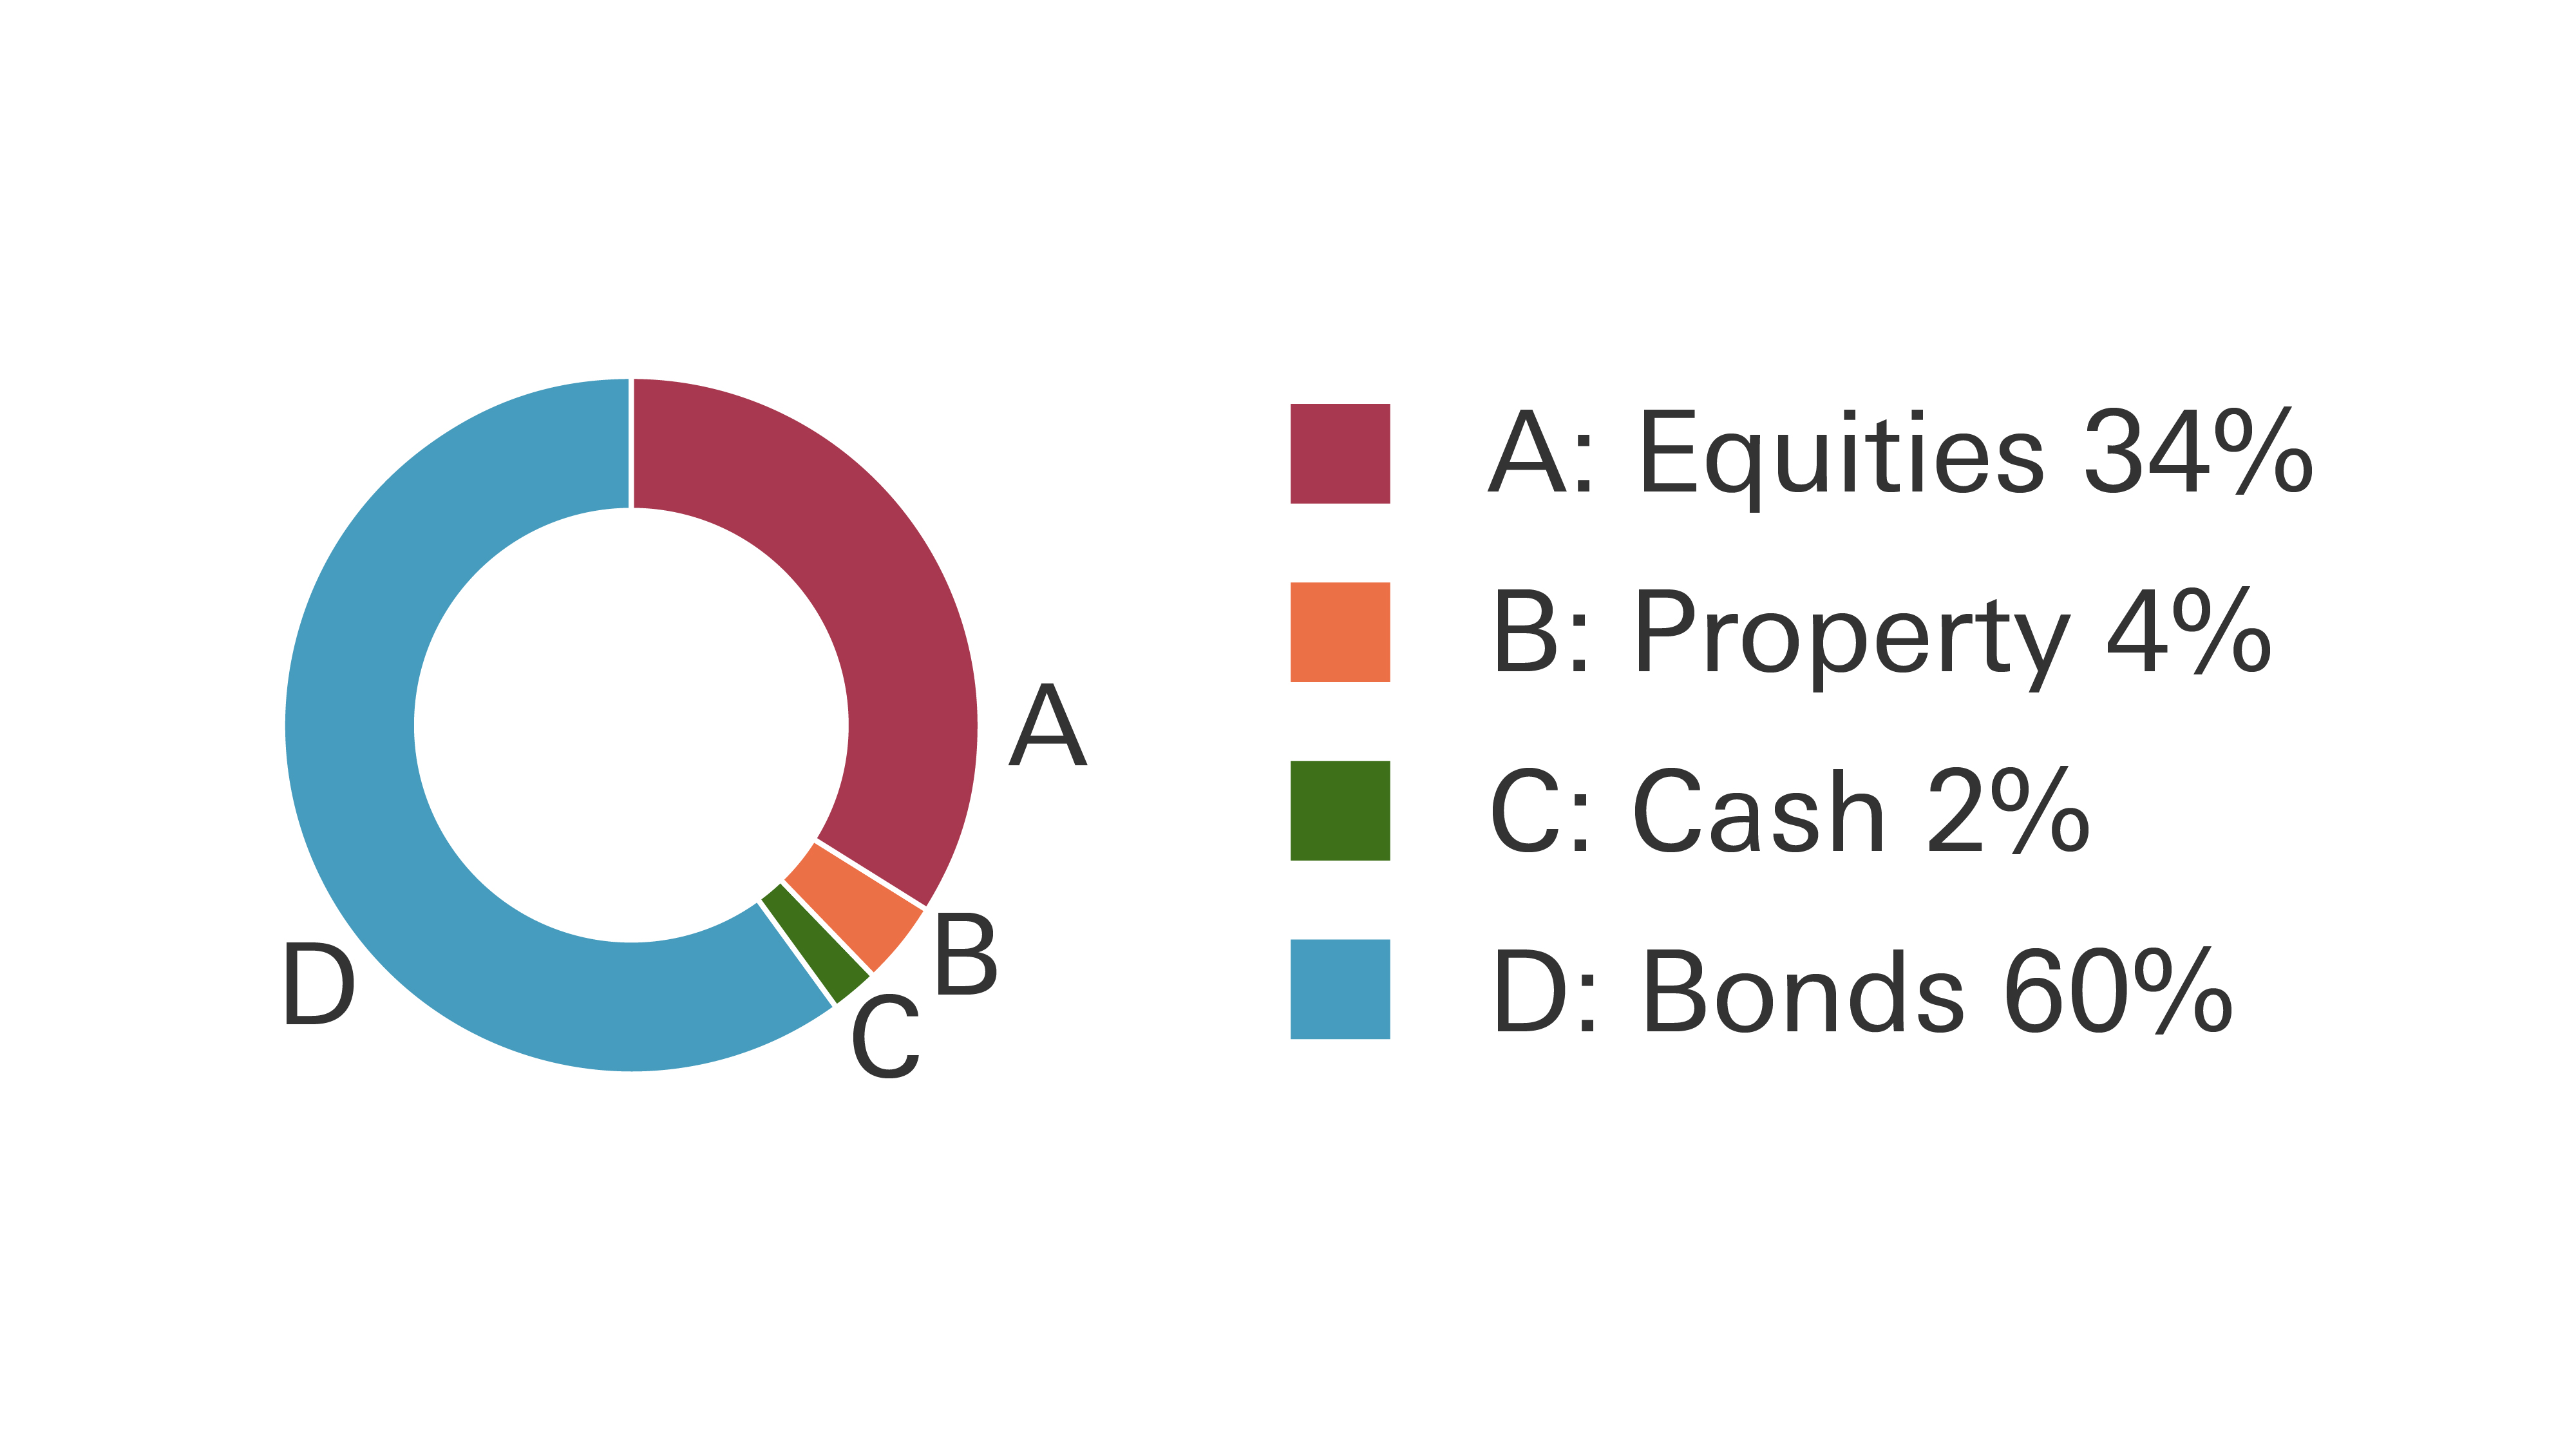 Conservative portfolio pie chart, showing Equities at 34%, Property 4%, Cash 2% and Bonds 60%.